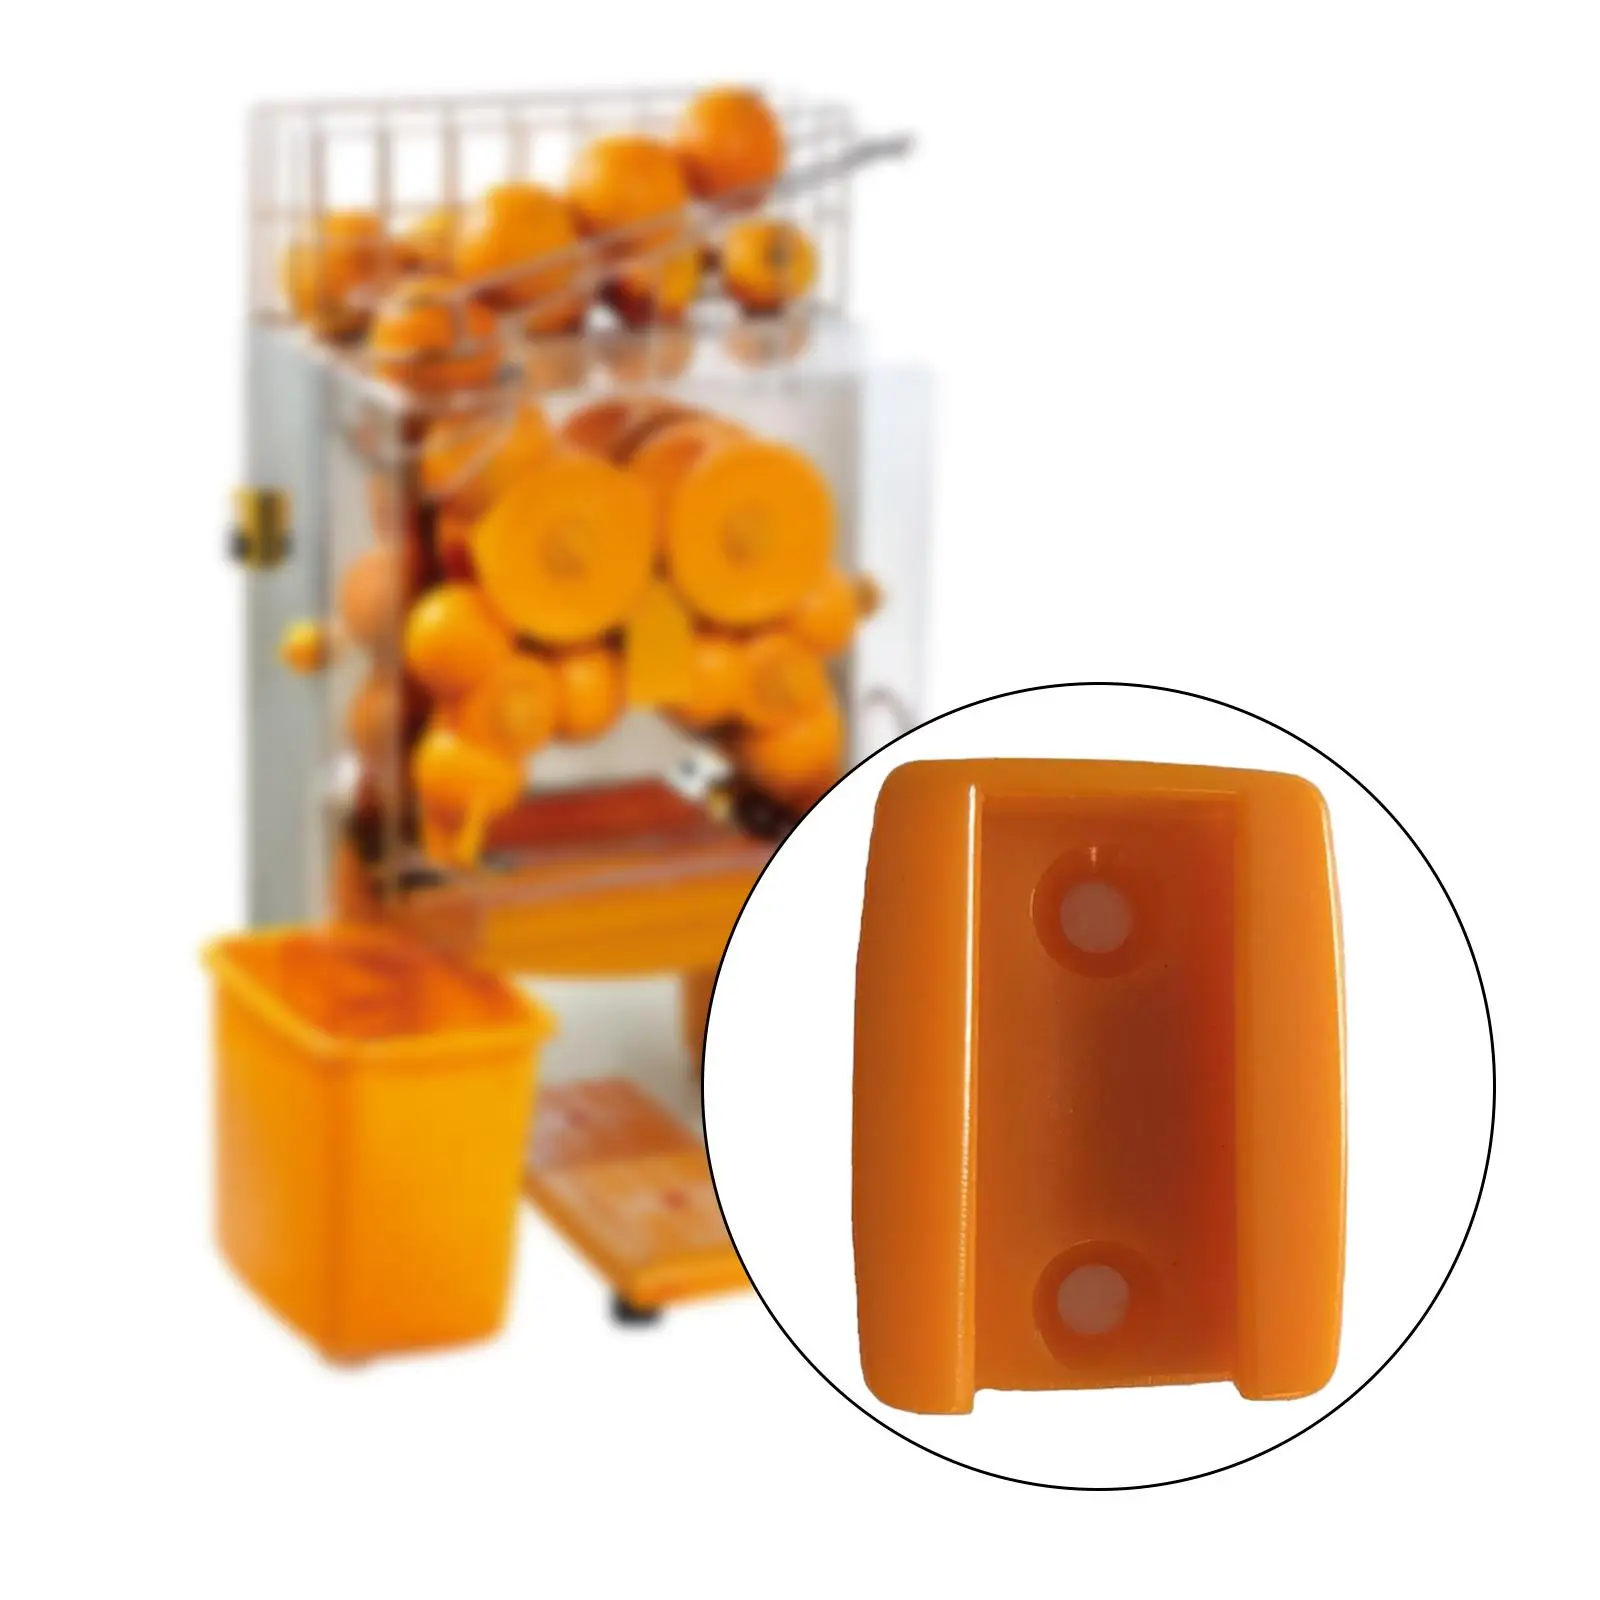 Orange Machine Spare Parts Holder Commercial and Electric Juicer Parts Commercial Juicer Spare Parts for XC-2000E Series